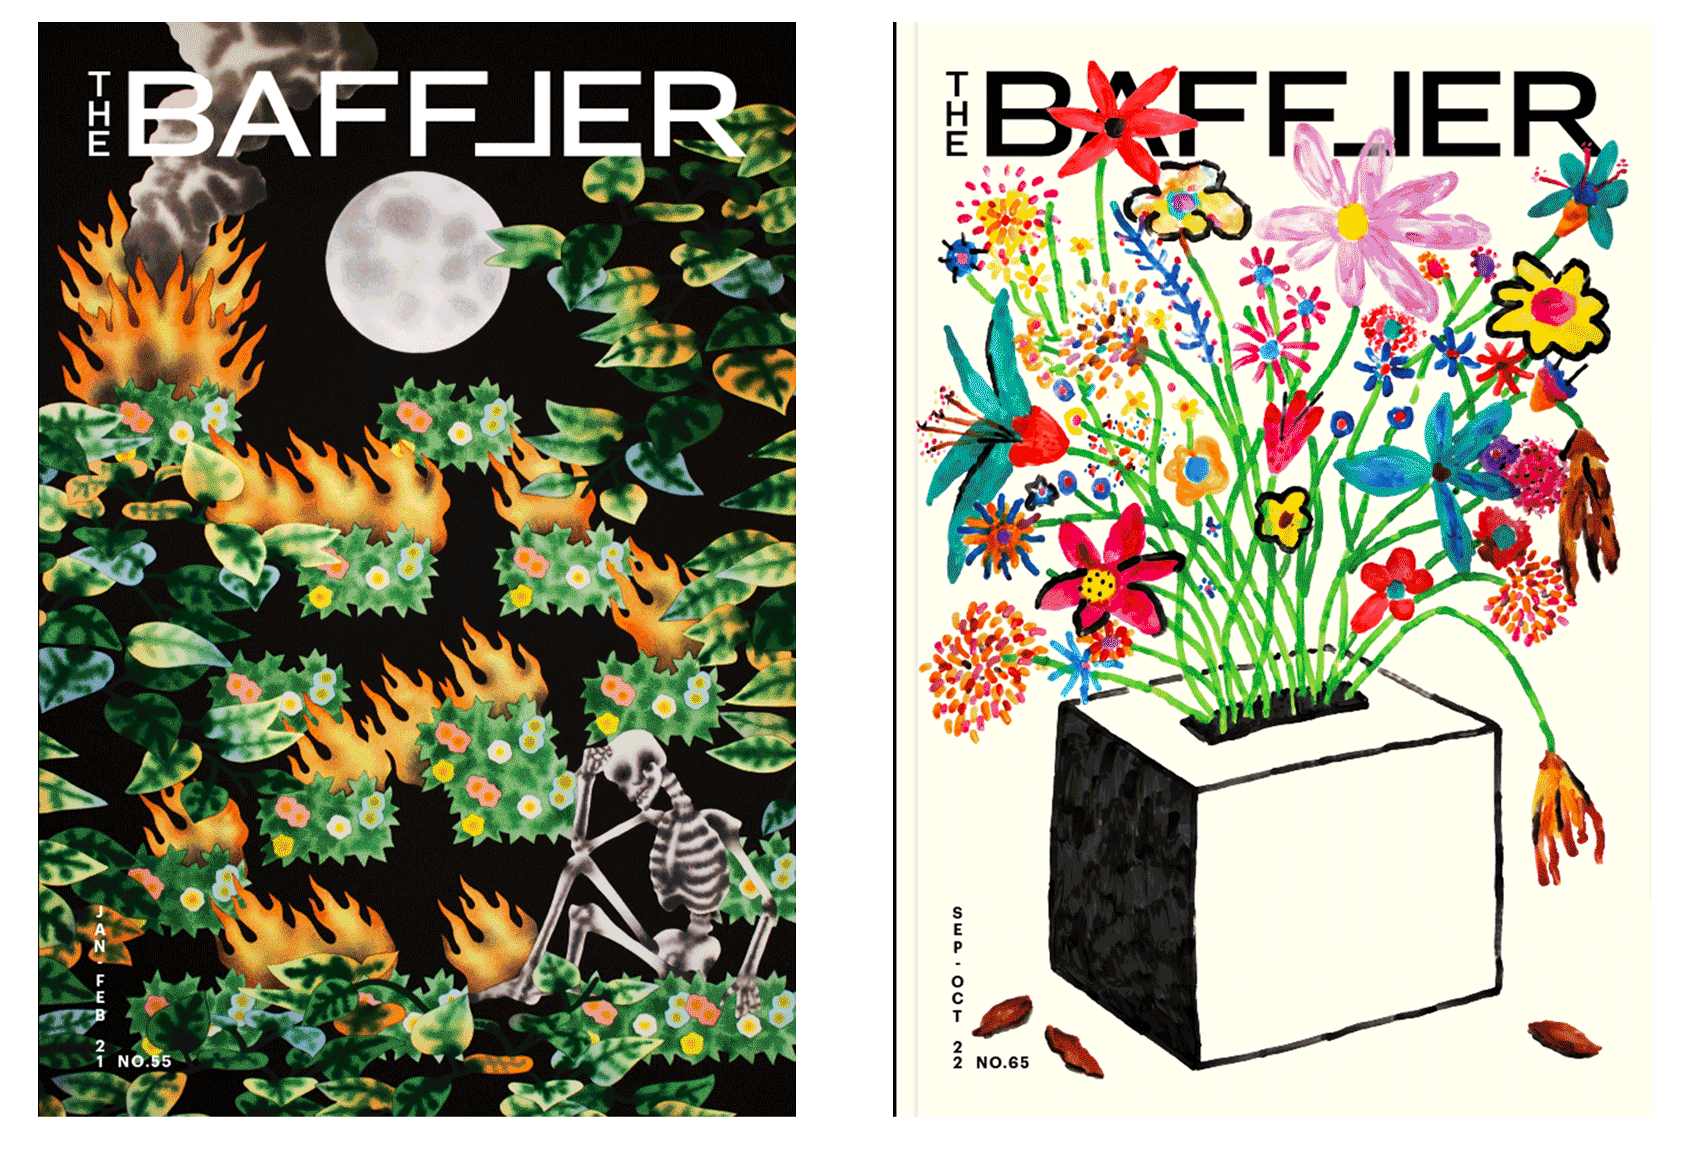 The Baffler covers